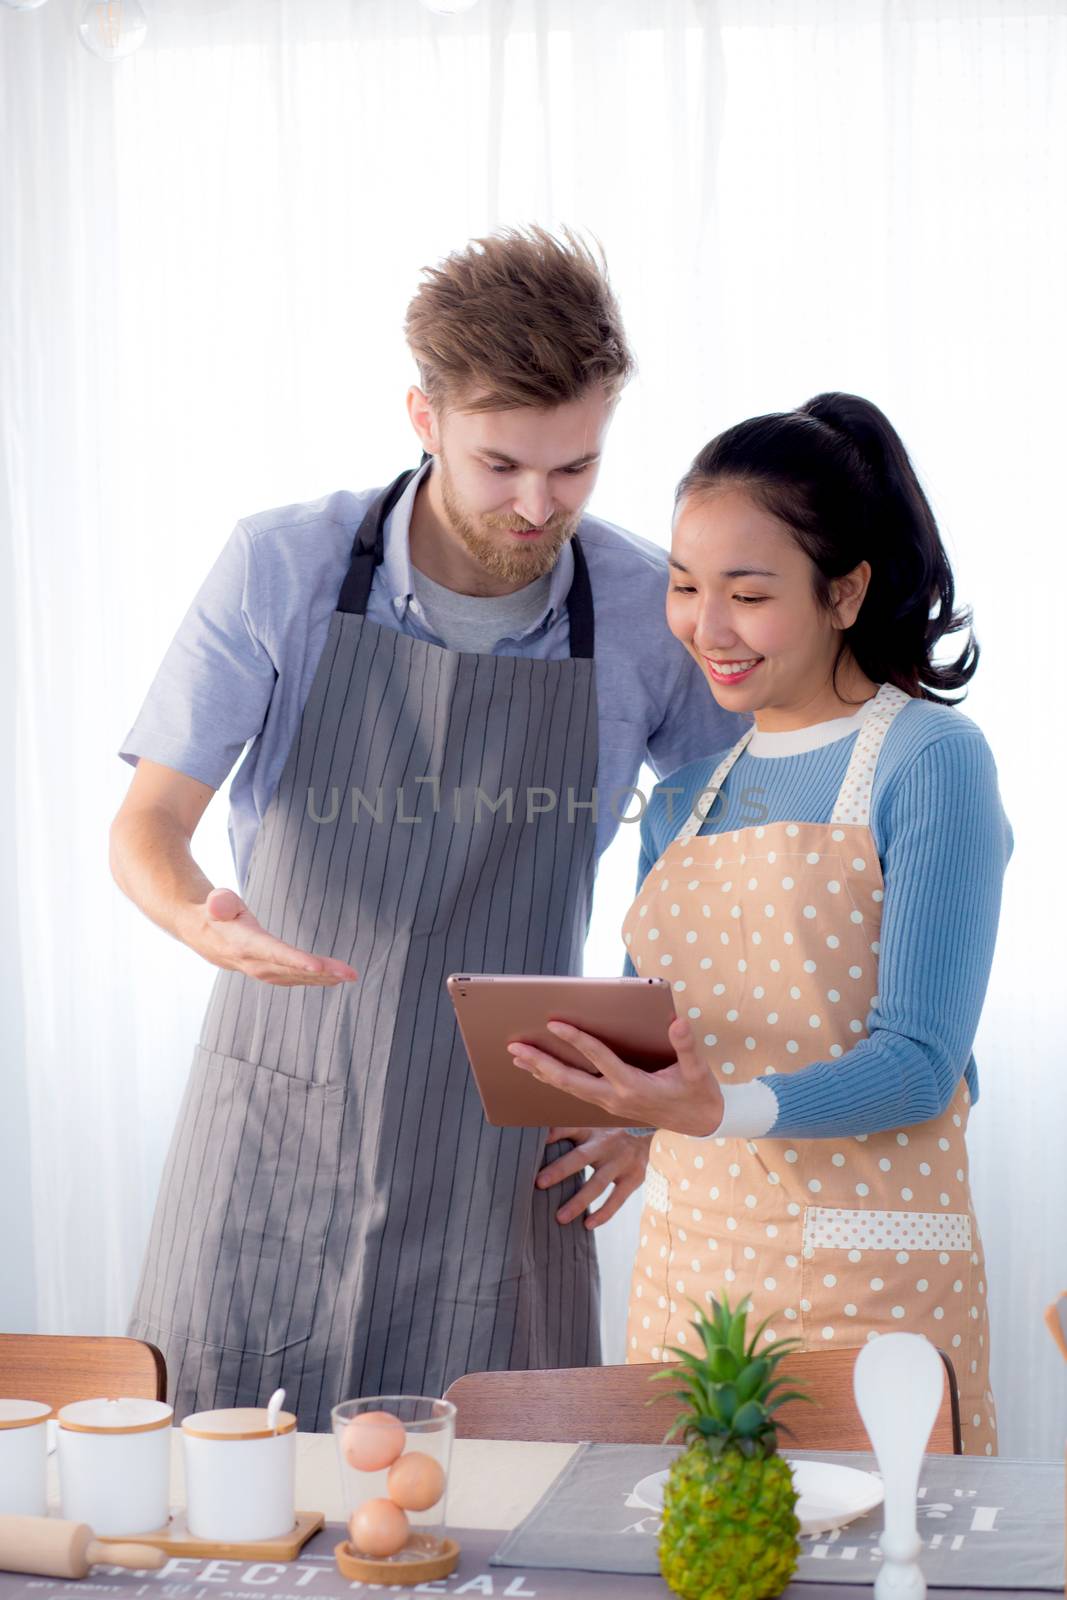 Young couple in kitchen looking at tablet - Man and girl using digital tablet in kitchen.